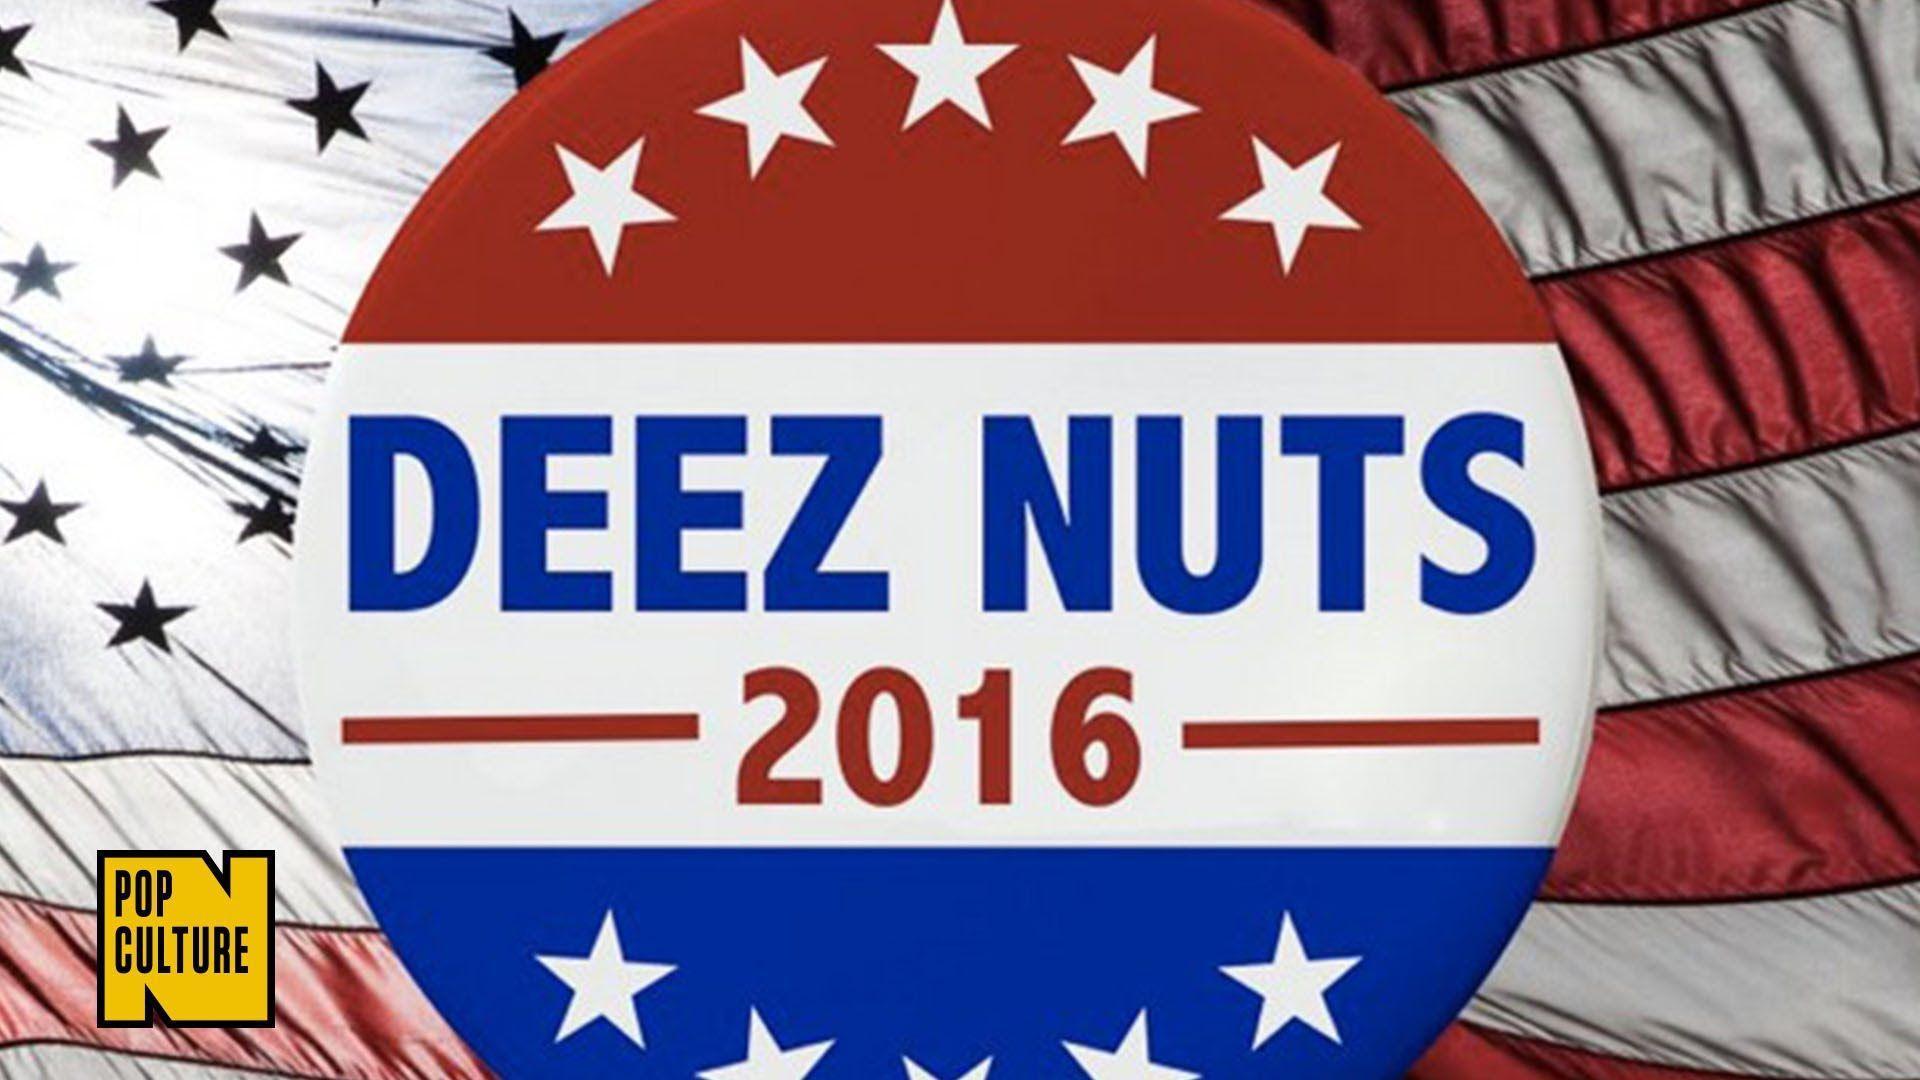 Who Is Presidential Candidate Deez Nuts?